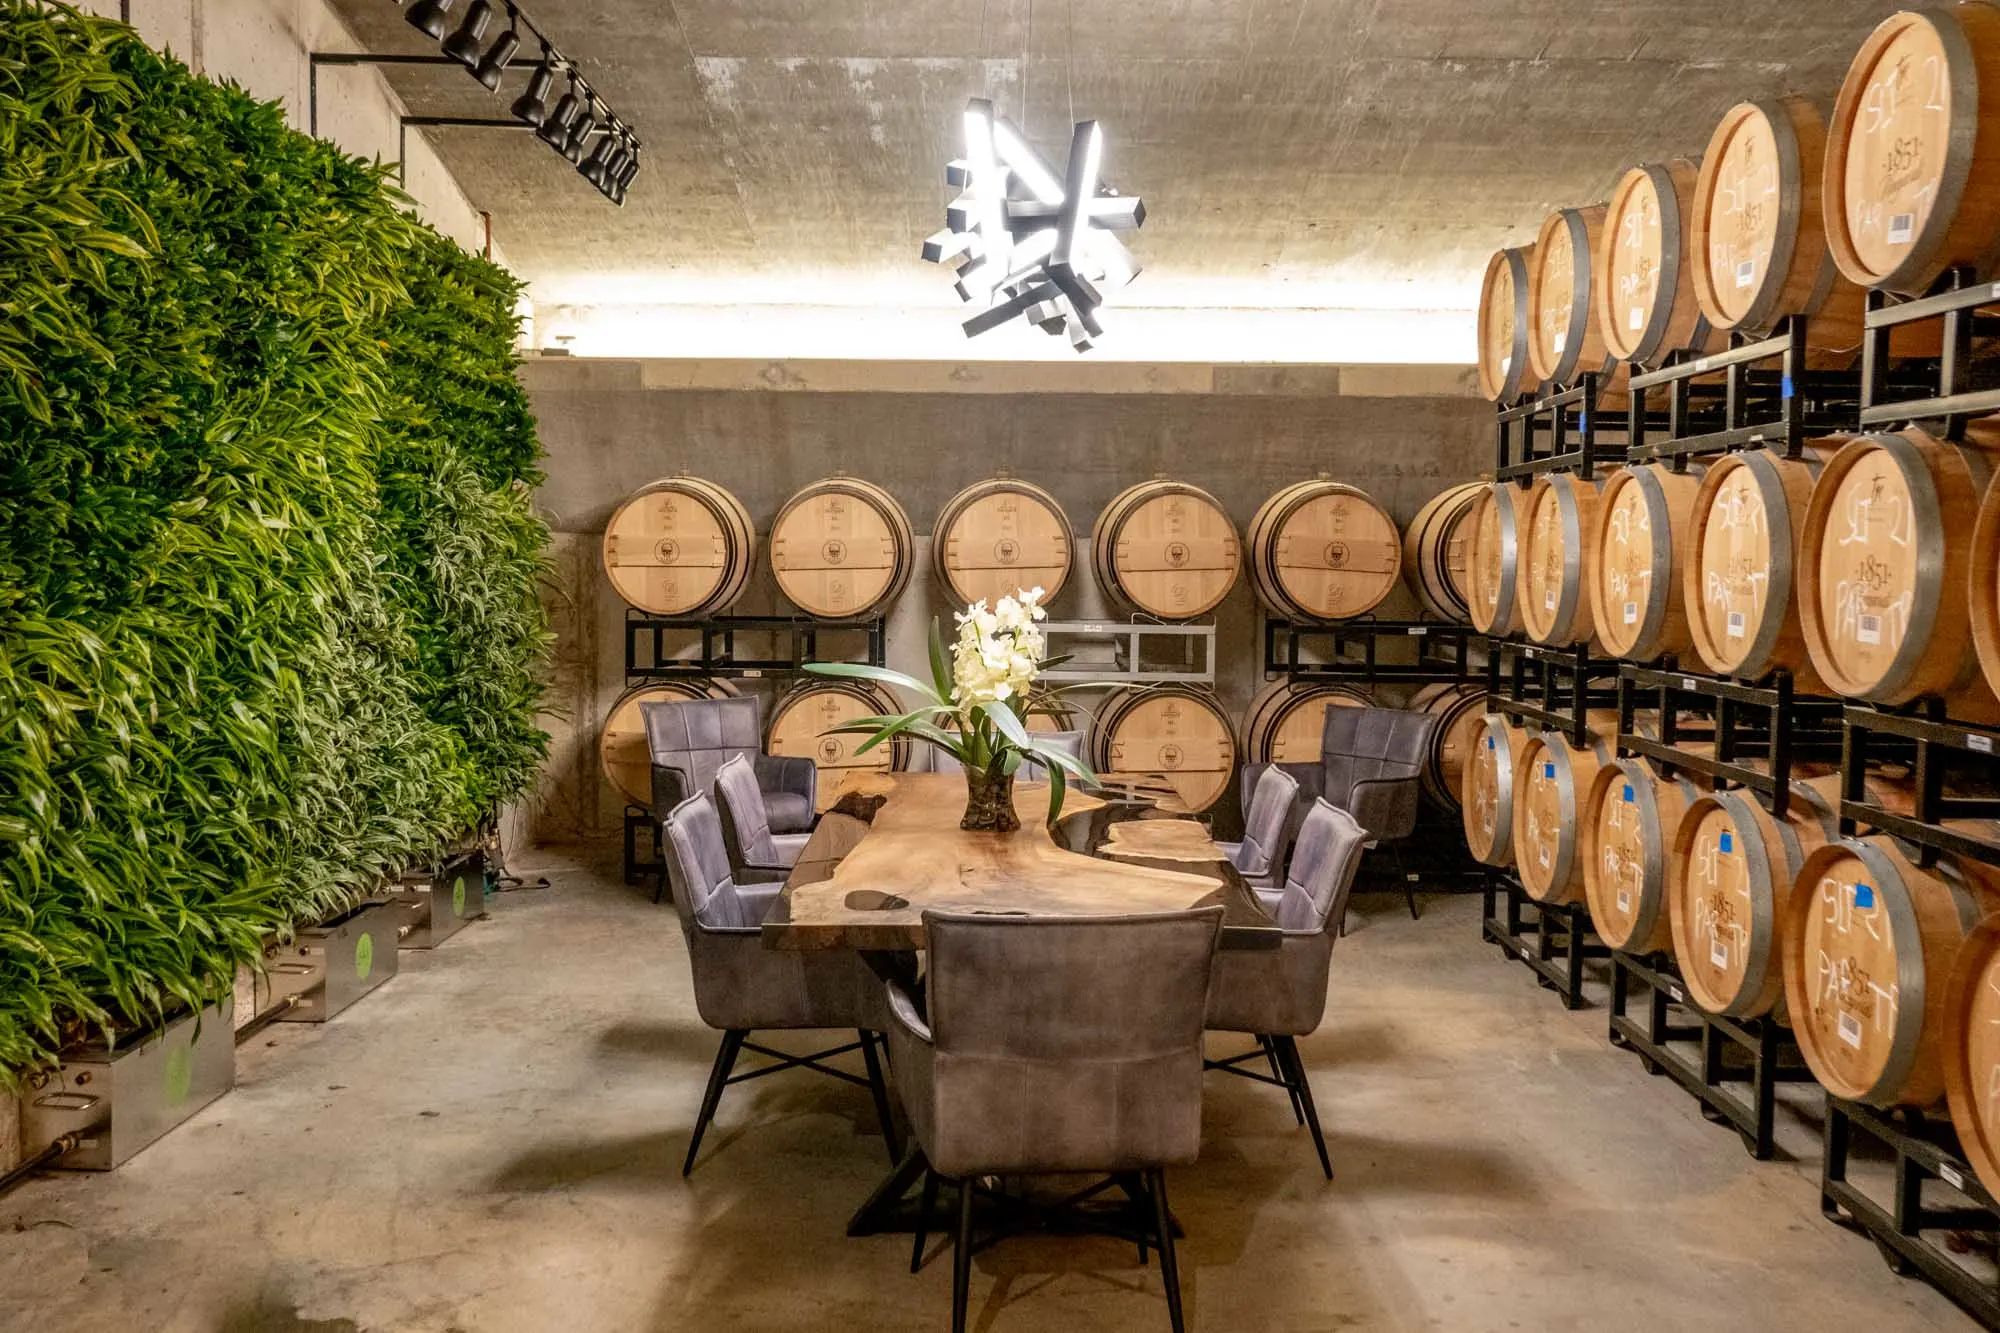 Table in the middle of a room lined with wine barrels and plants.